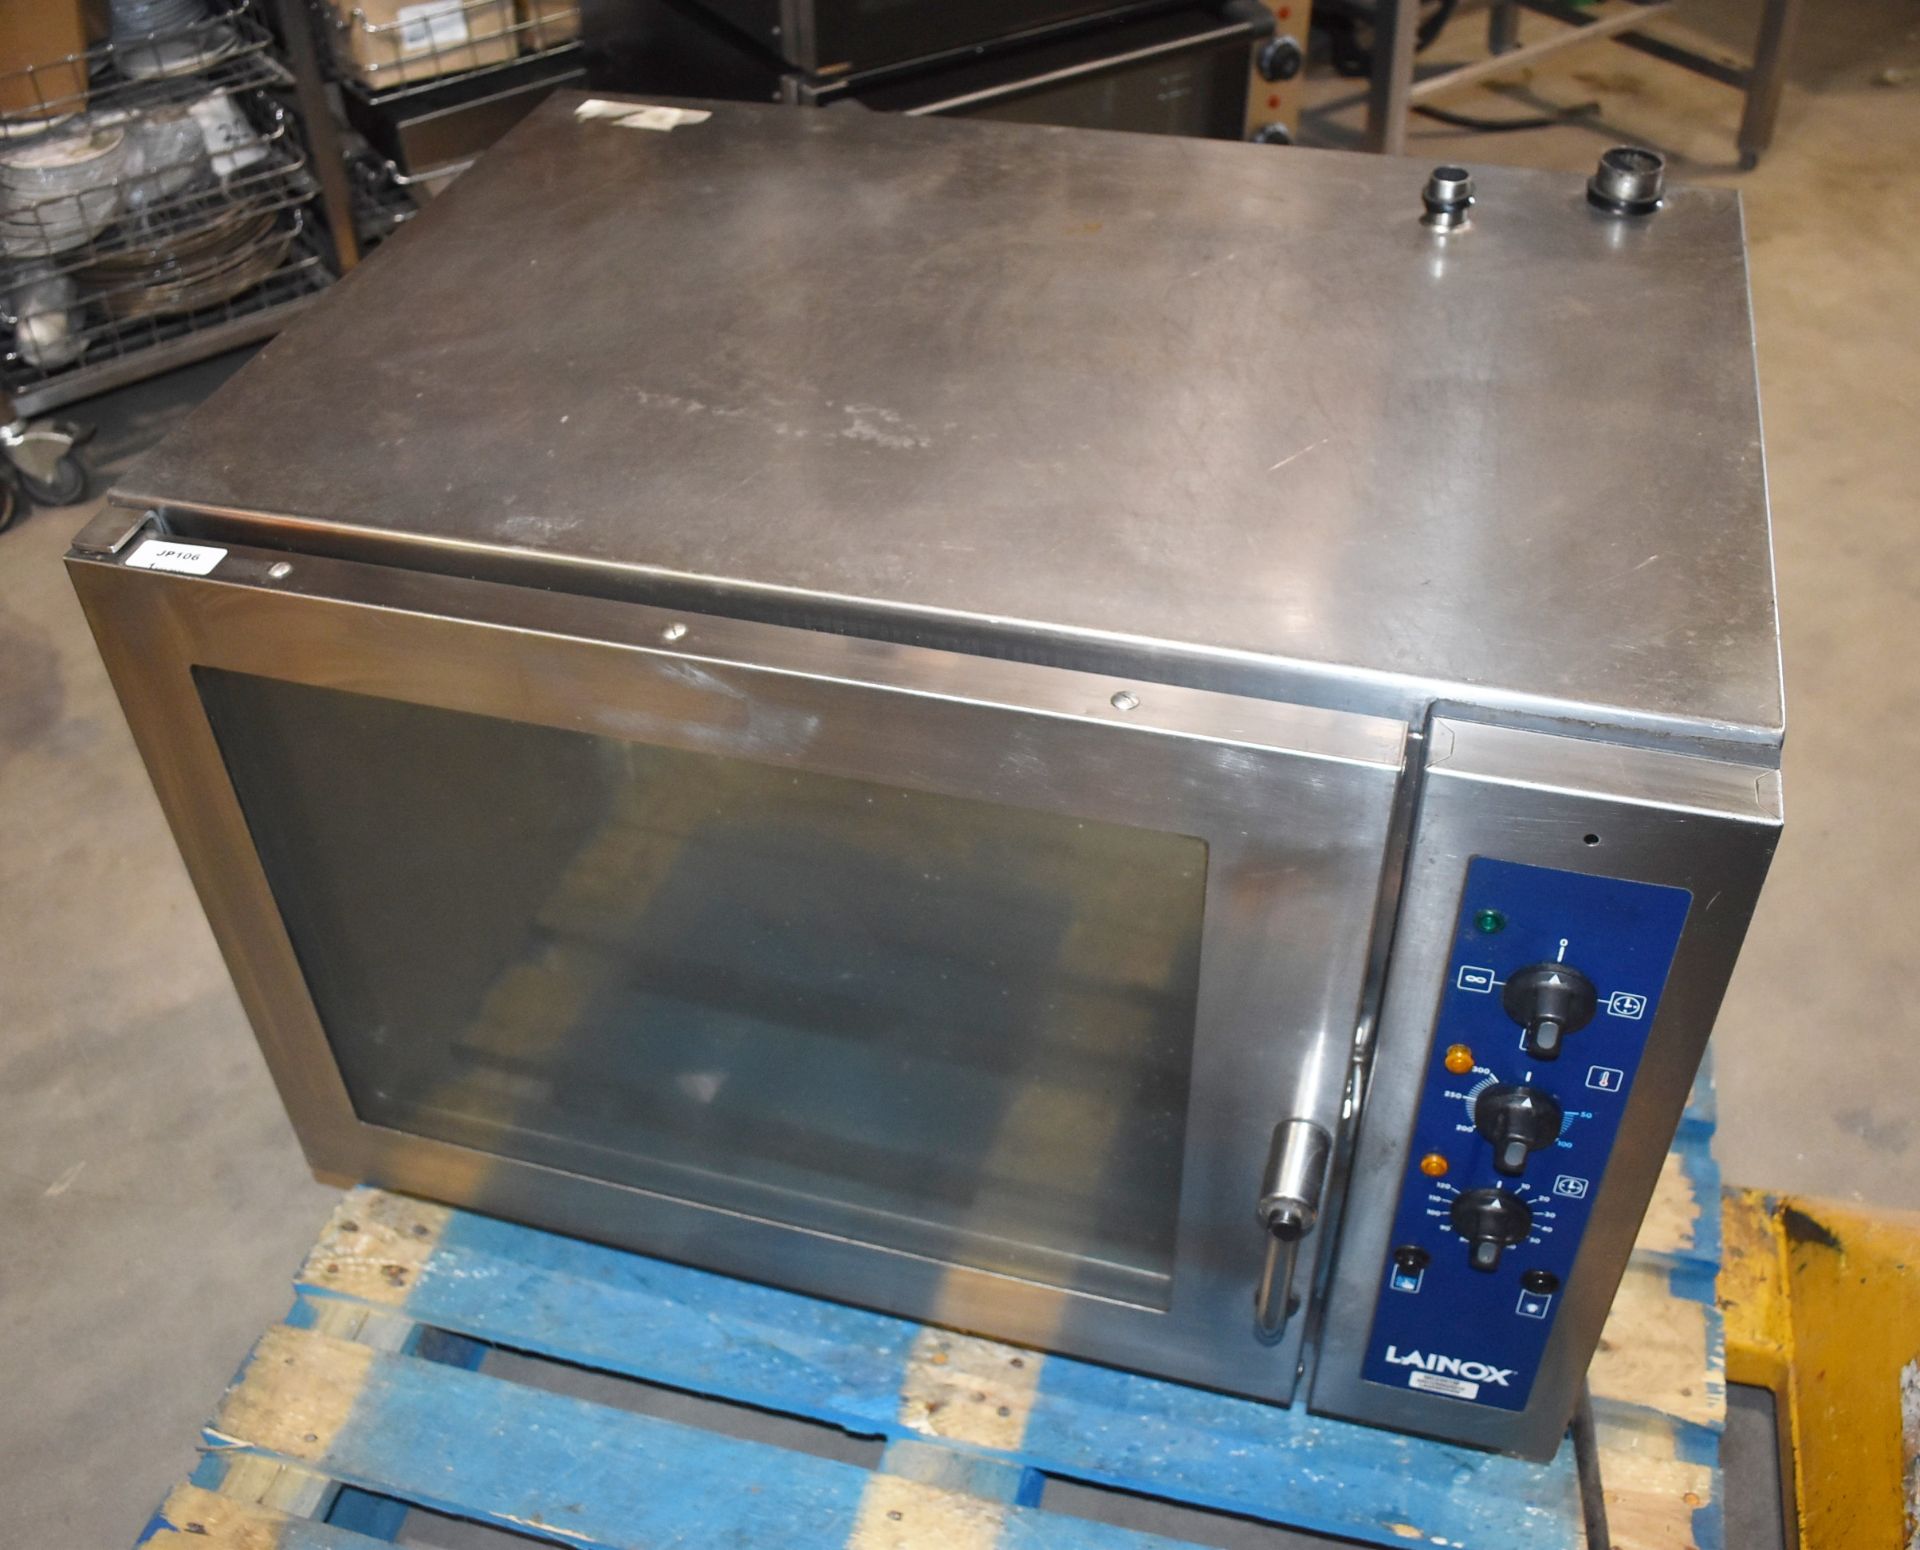 1 x Lainox MCE051M Commercial Electric 400v Convection Oven With Stainless Steel Exterior - Recently - Image 3 of 9